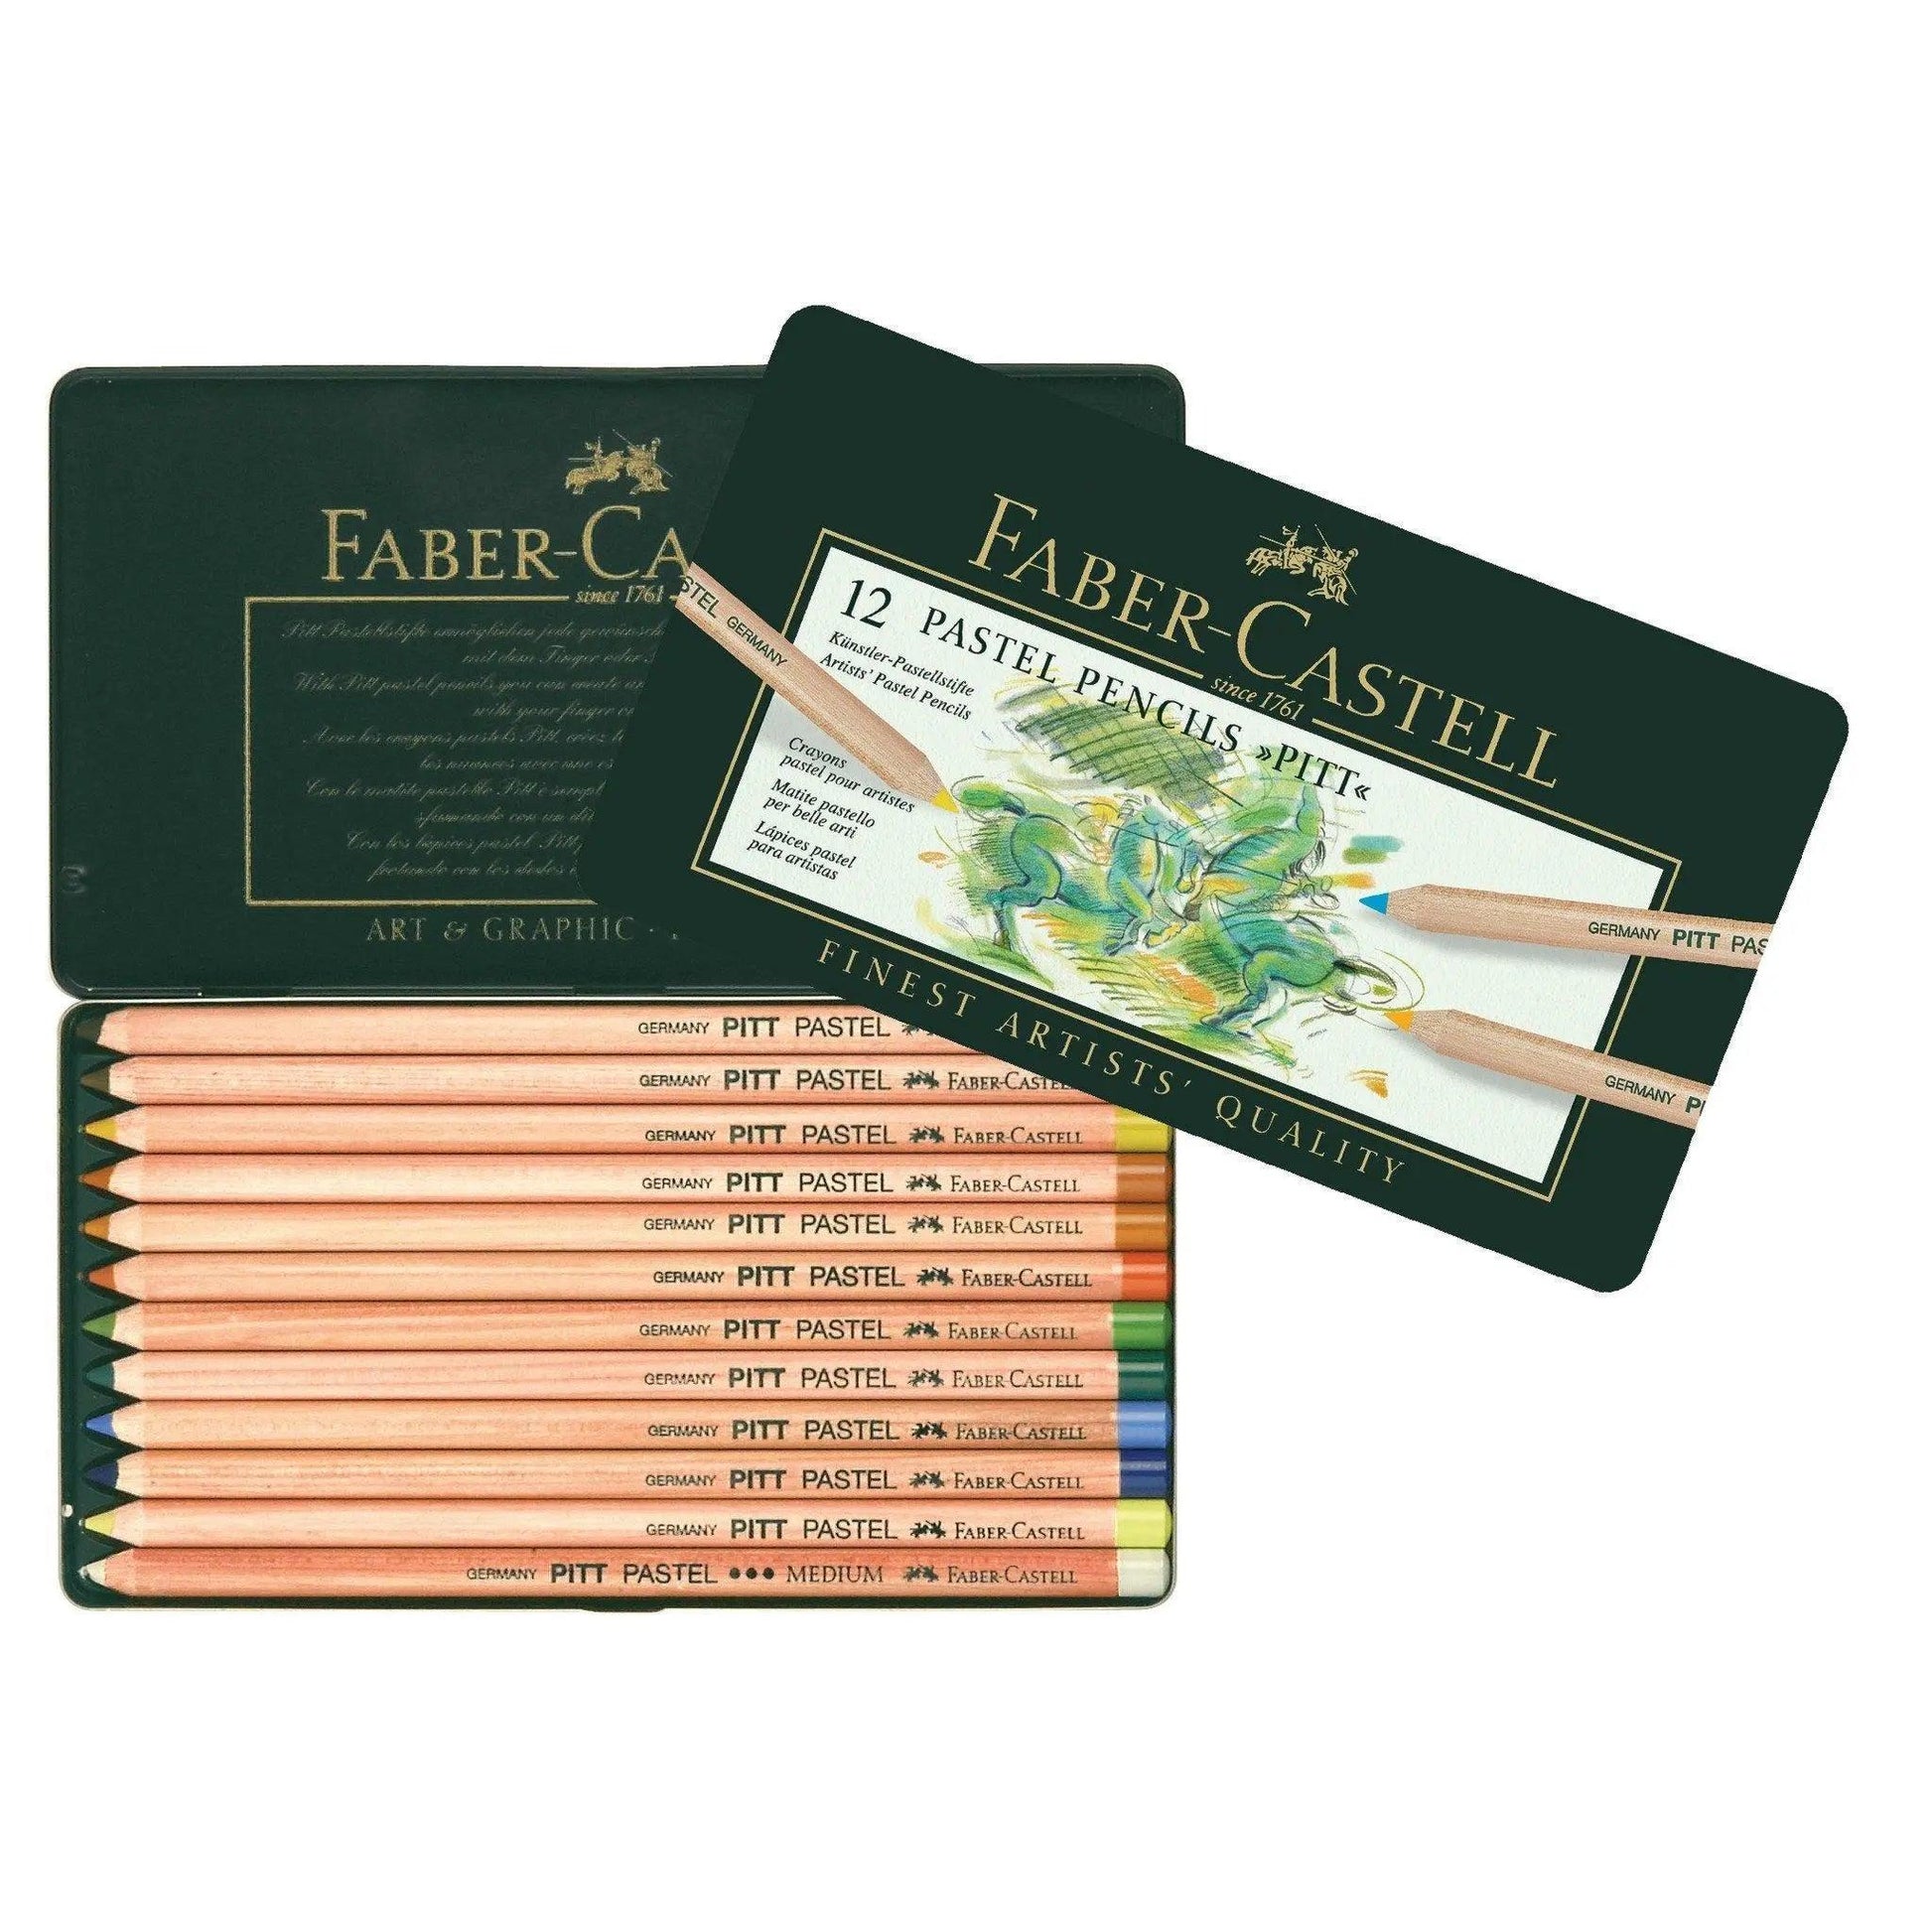 Faber Castell Pitt Pastel Pencils Tin of 12 The Stationers